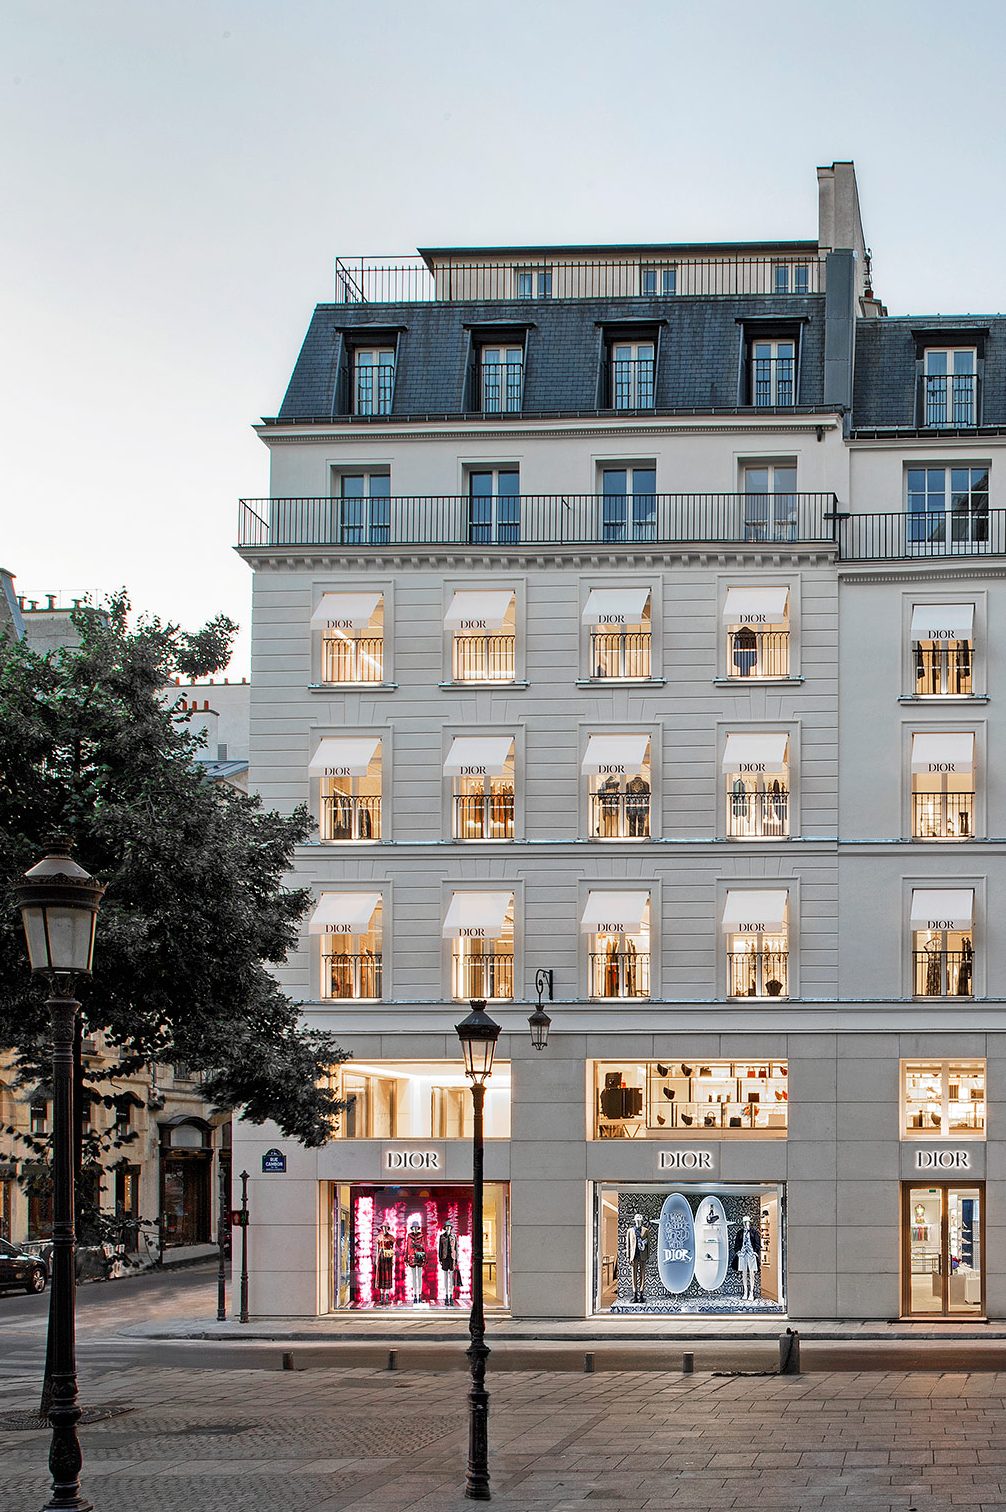 The new Dior store at rue Saint-Honoré. Image courtesy of Dior